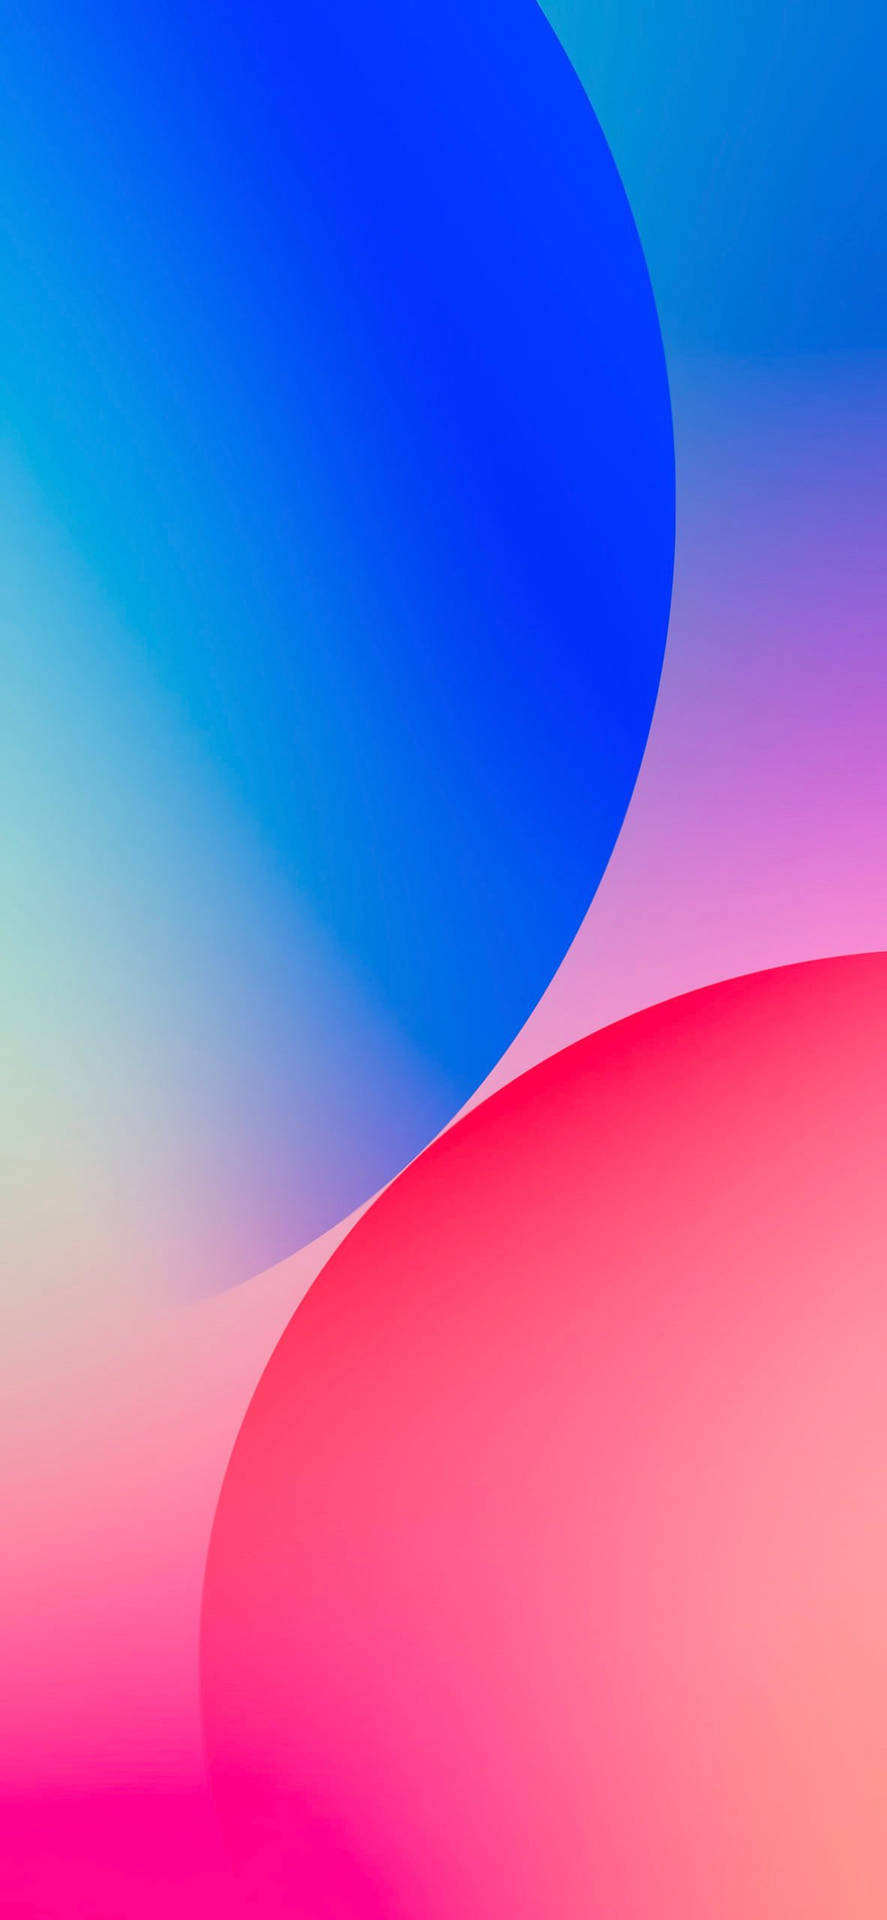 Blue And Red Bubbles Ios 16 Wallpaper